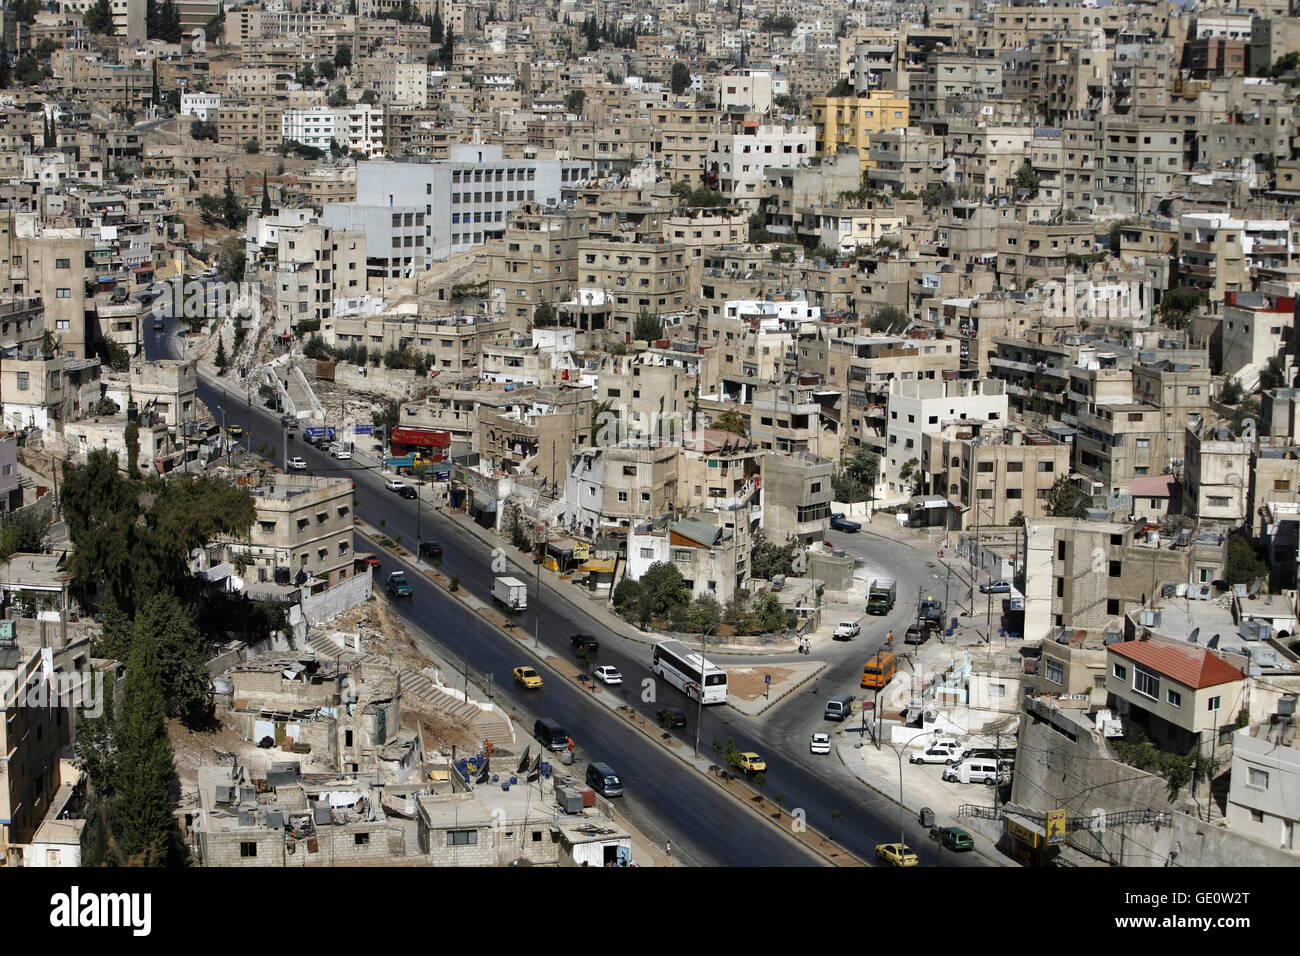 The City Centre of the City Amman in Jordan in the middle east Stock Photo  - Alamy